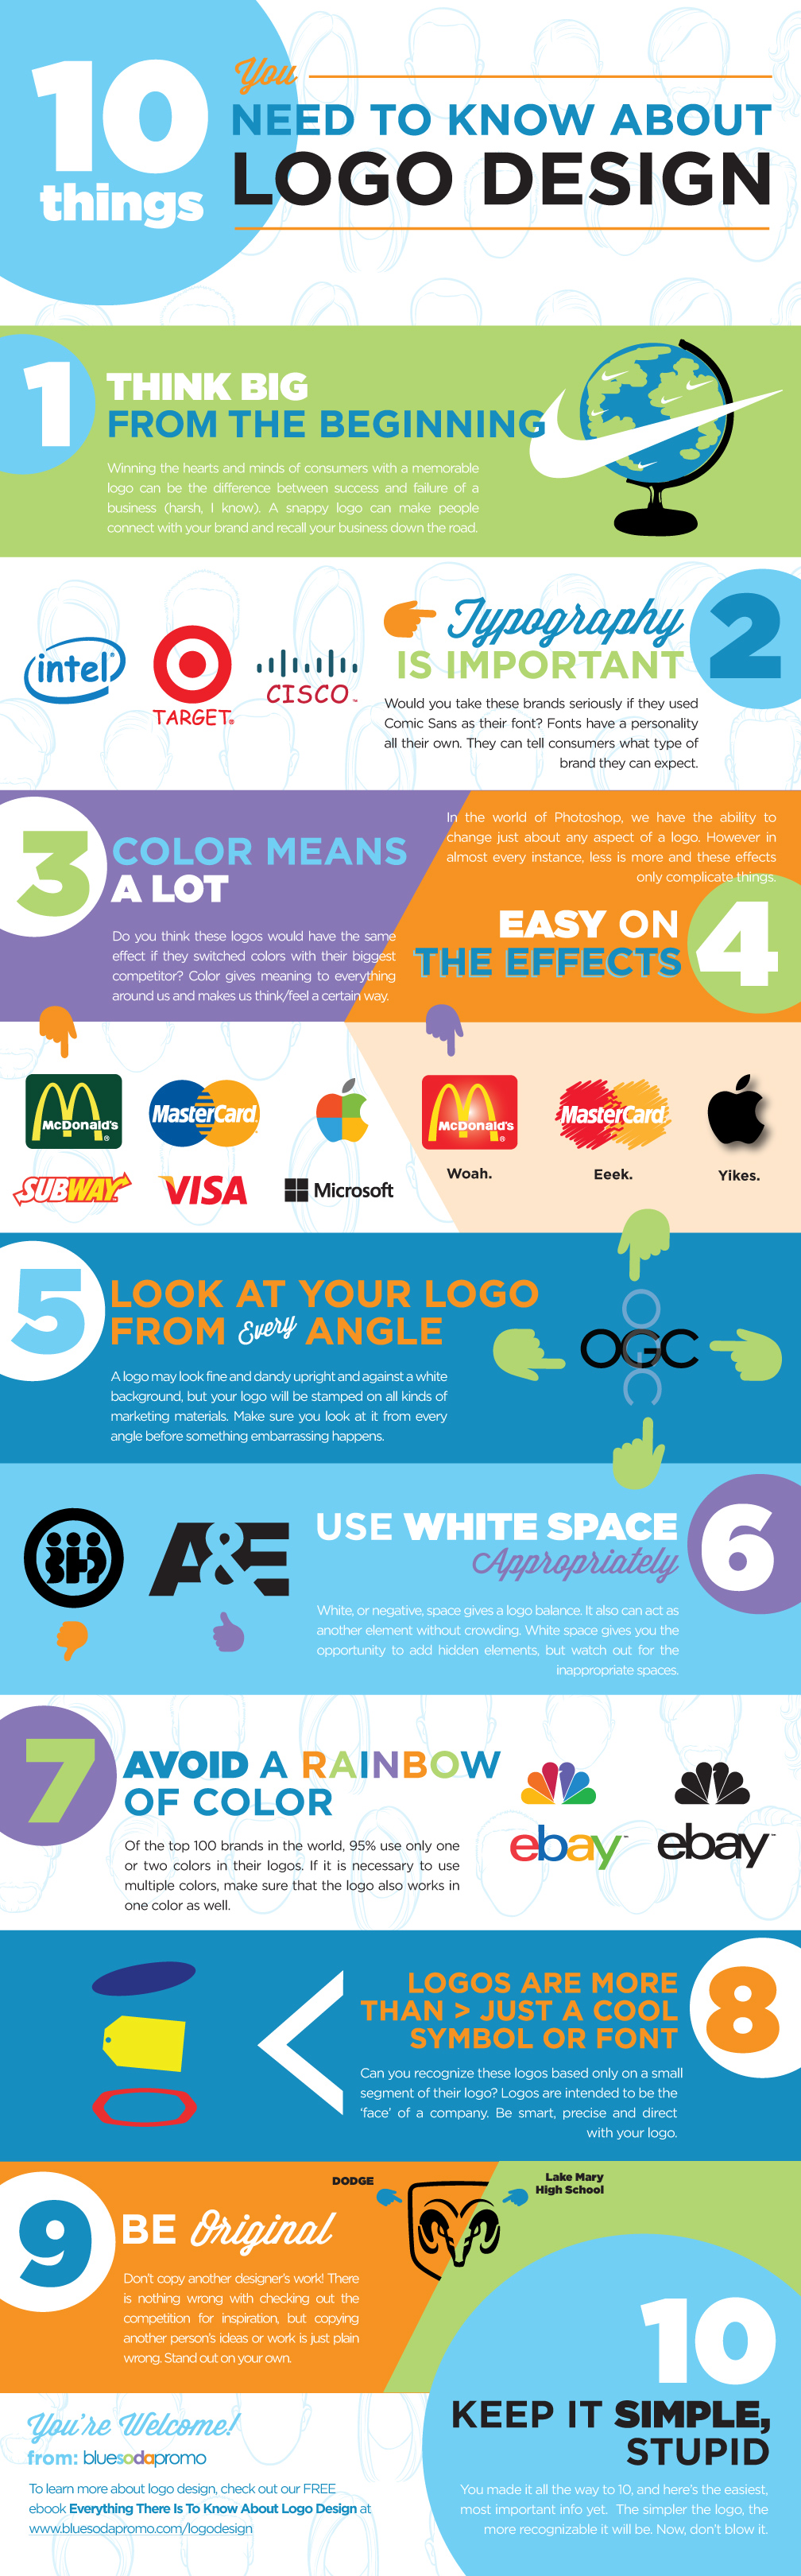 10 Things You Need to Know About Logo Design infographic